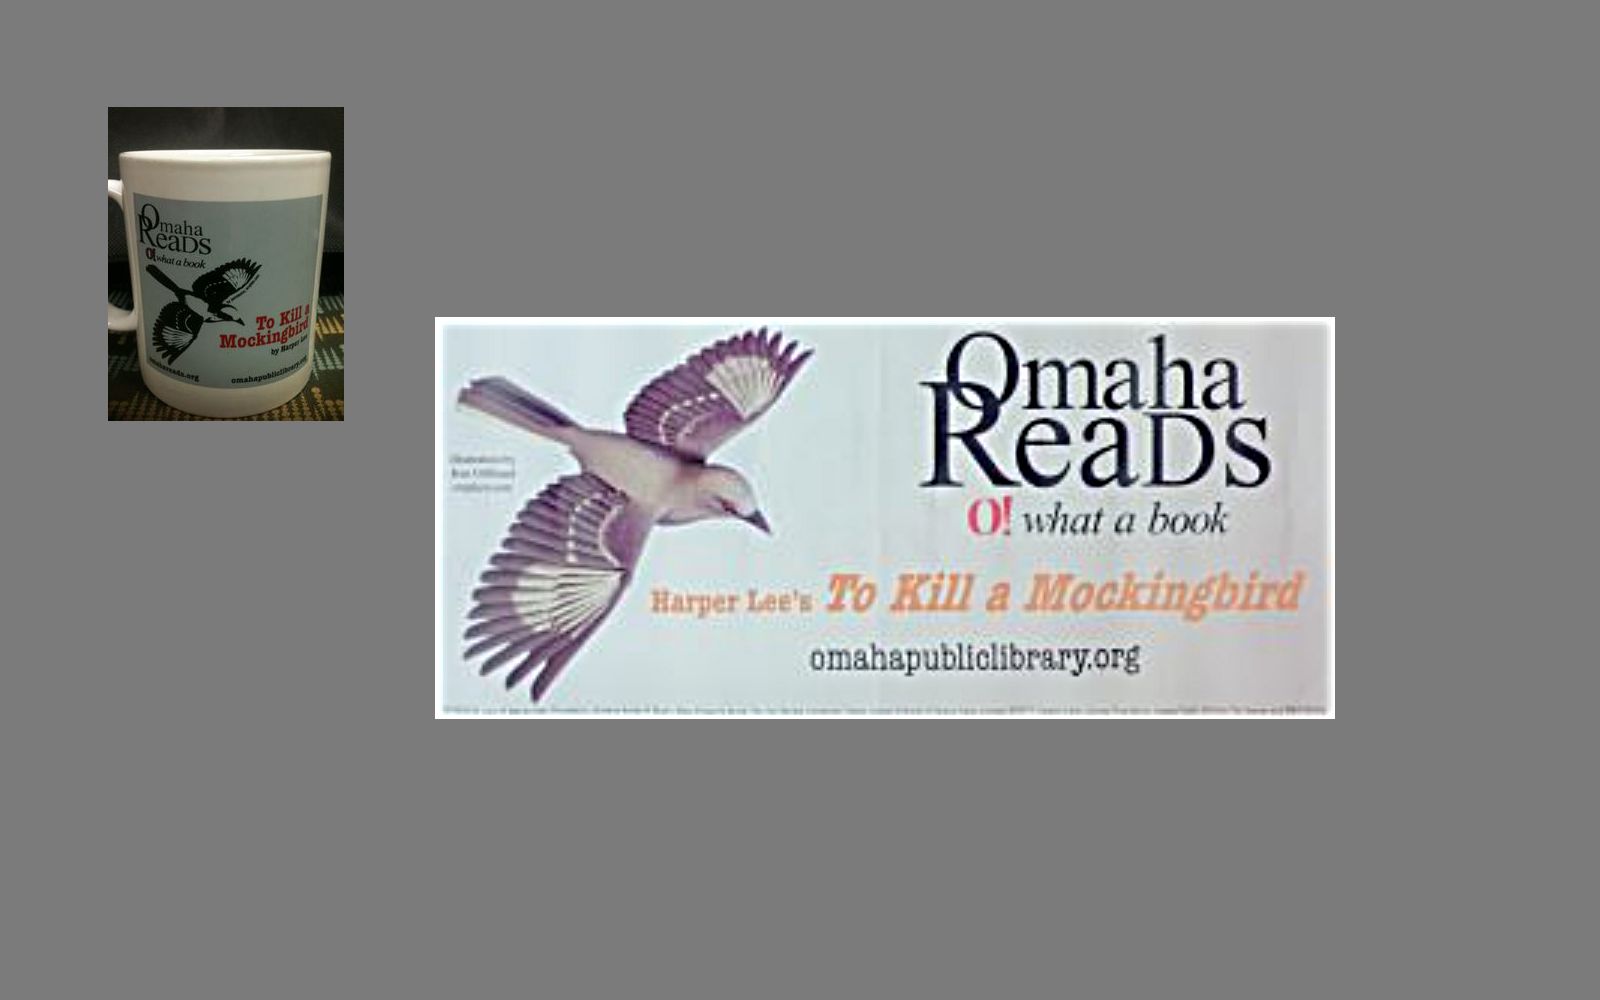 The Songbird ReMix Mockingbird was featured in the Omaha Reads: To Kill a Mockingbird promotion